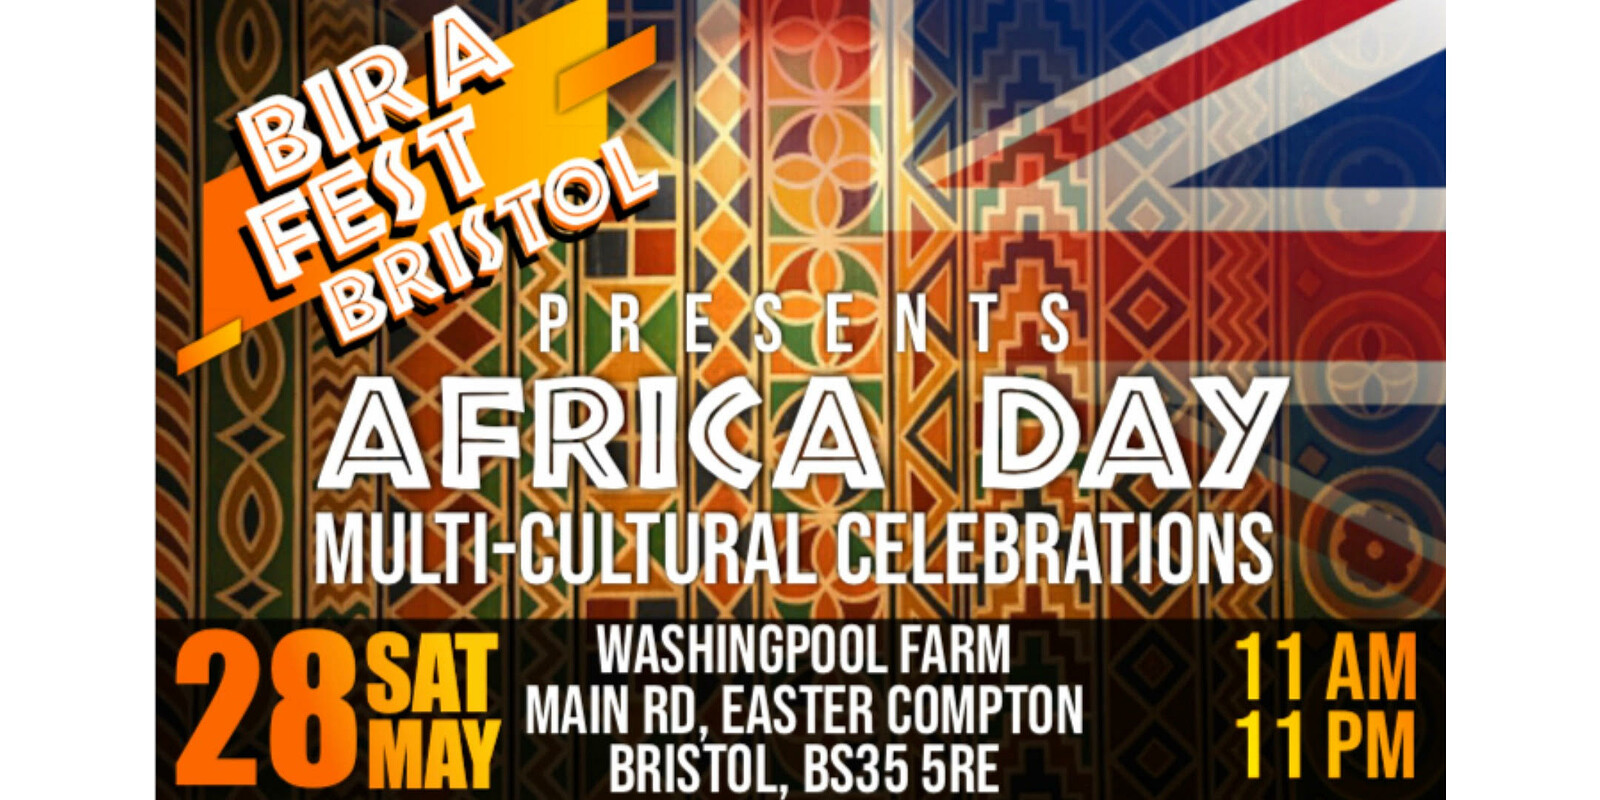 Africa Day Multi Cultural Celebrations at Washingpool Farm, Main Road, Easter Compton, Bristol, BS35 5RE